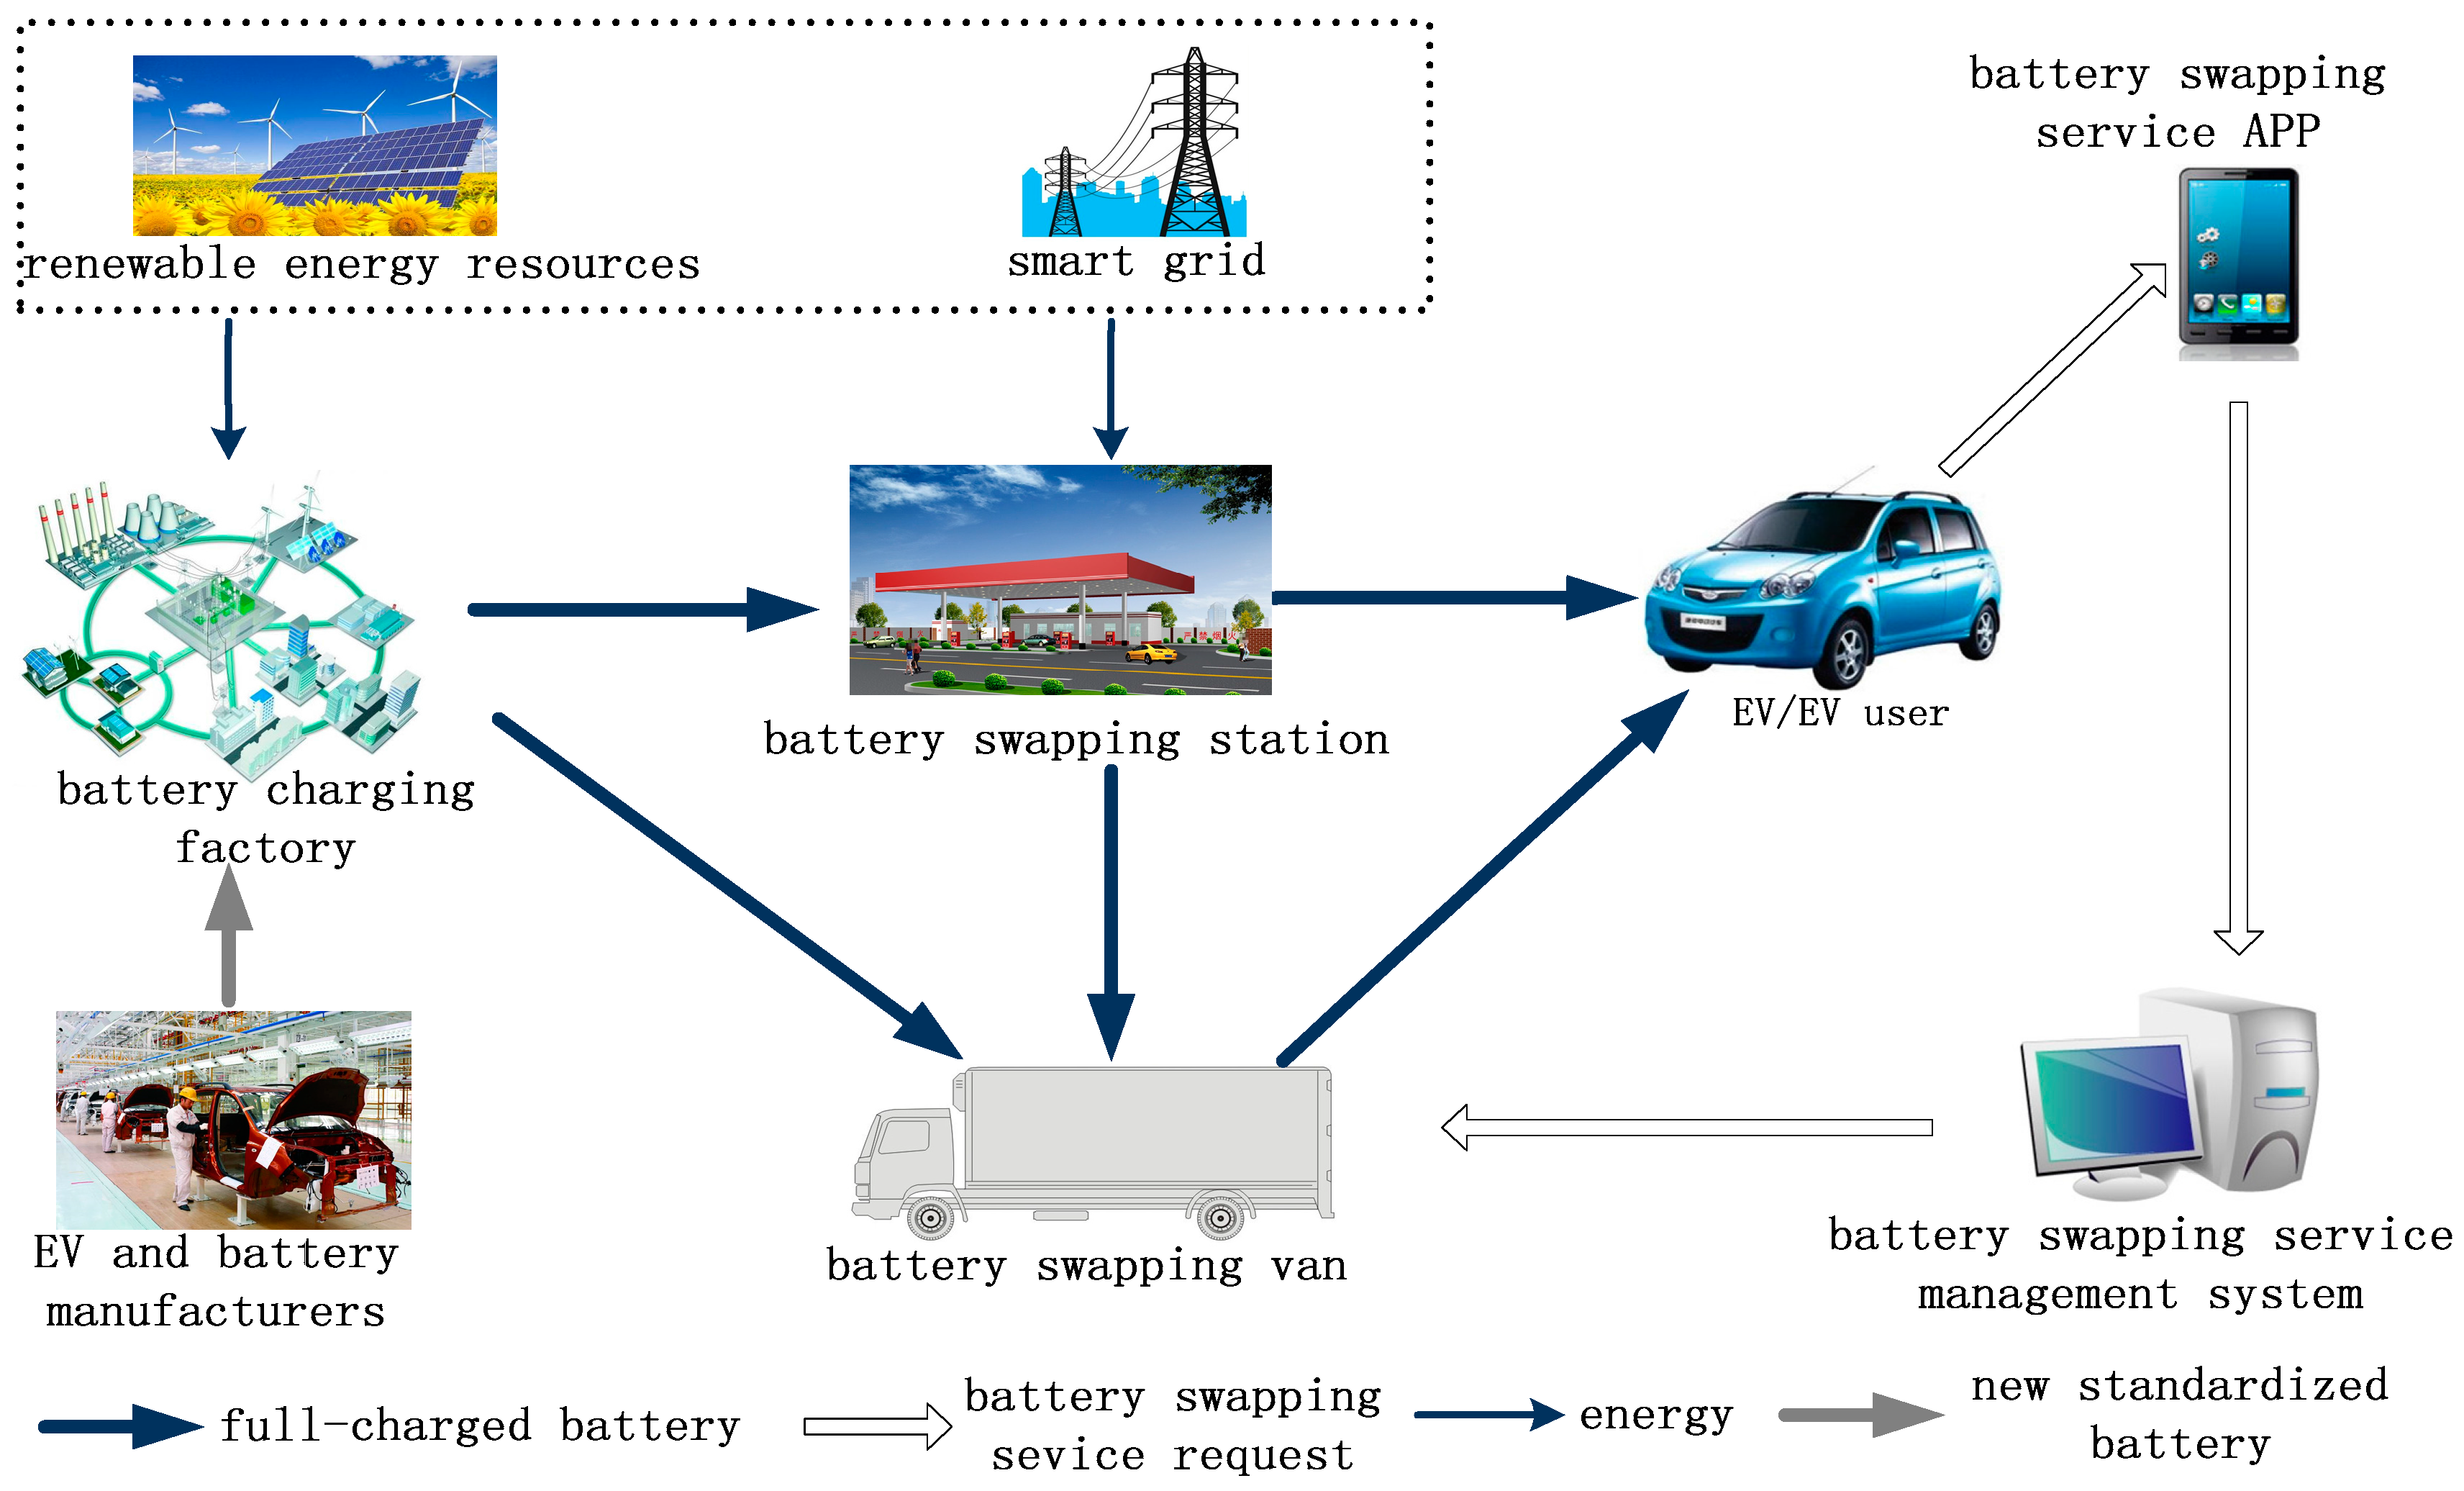 Energies Free FullText A Mobile Battery Swapping Service for